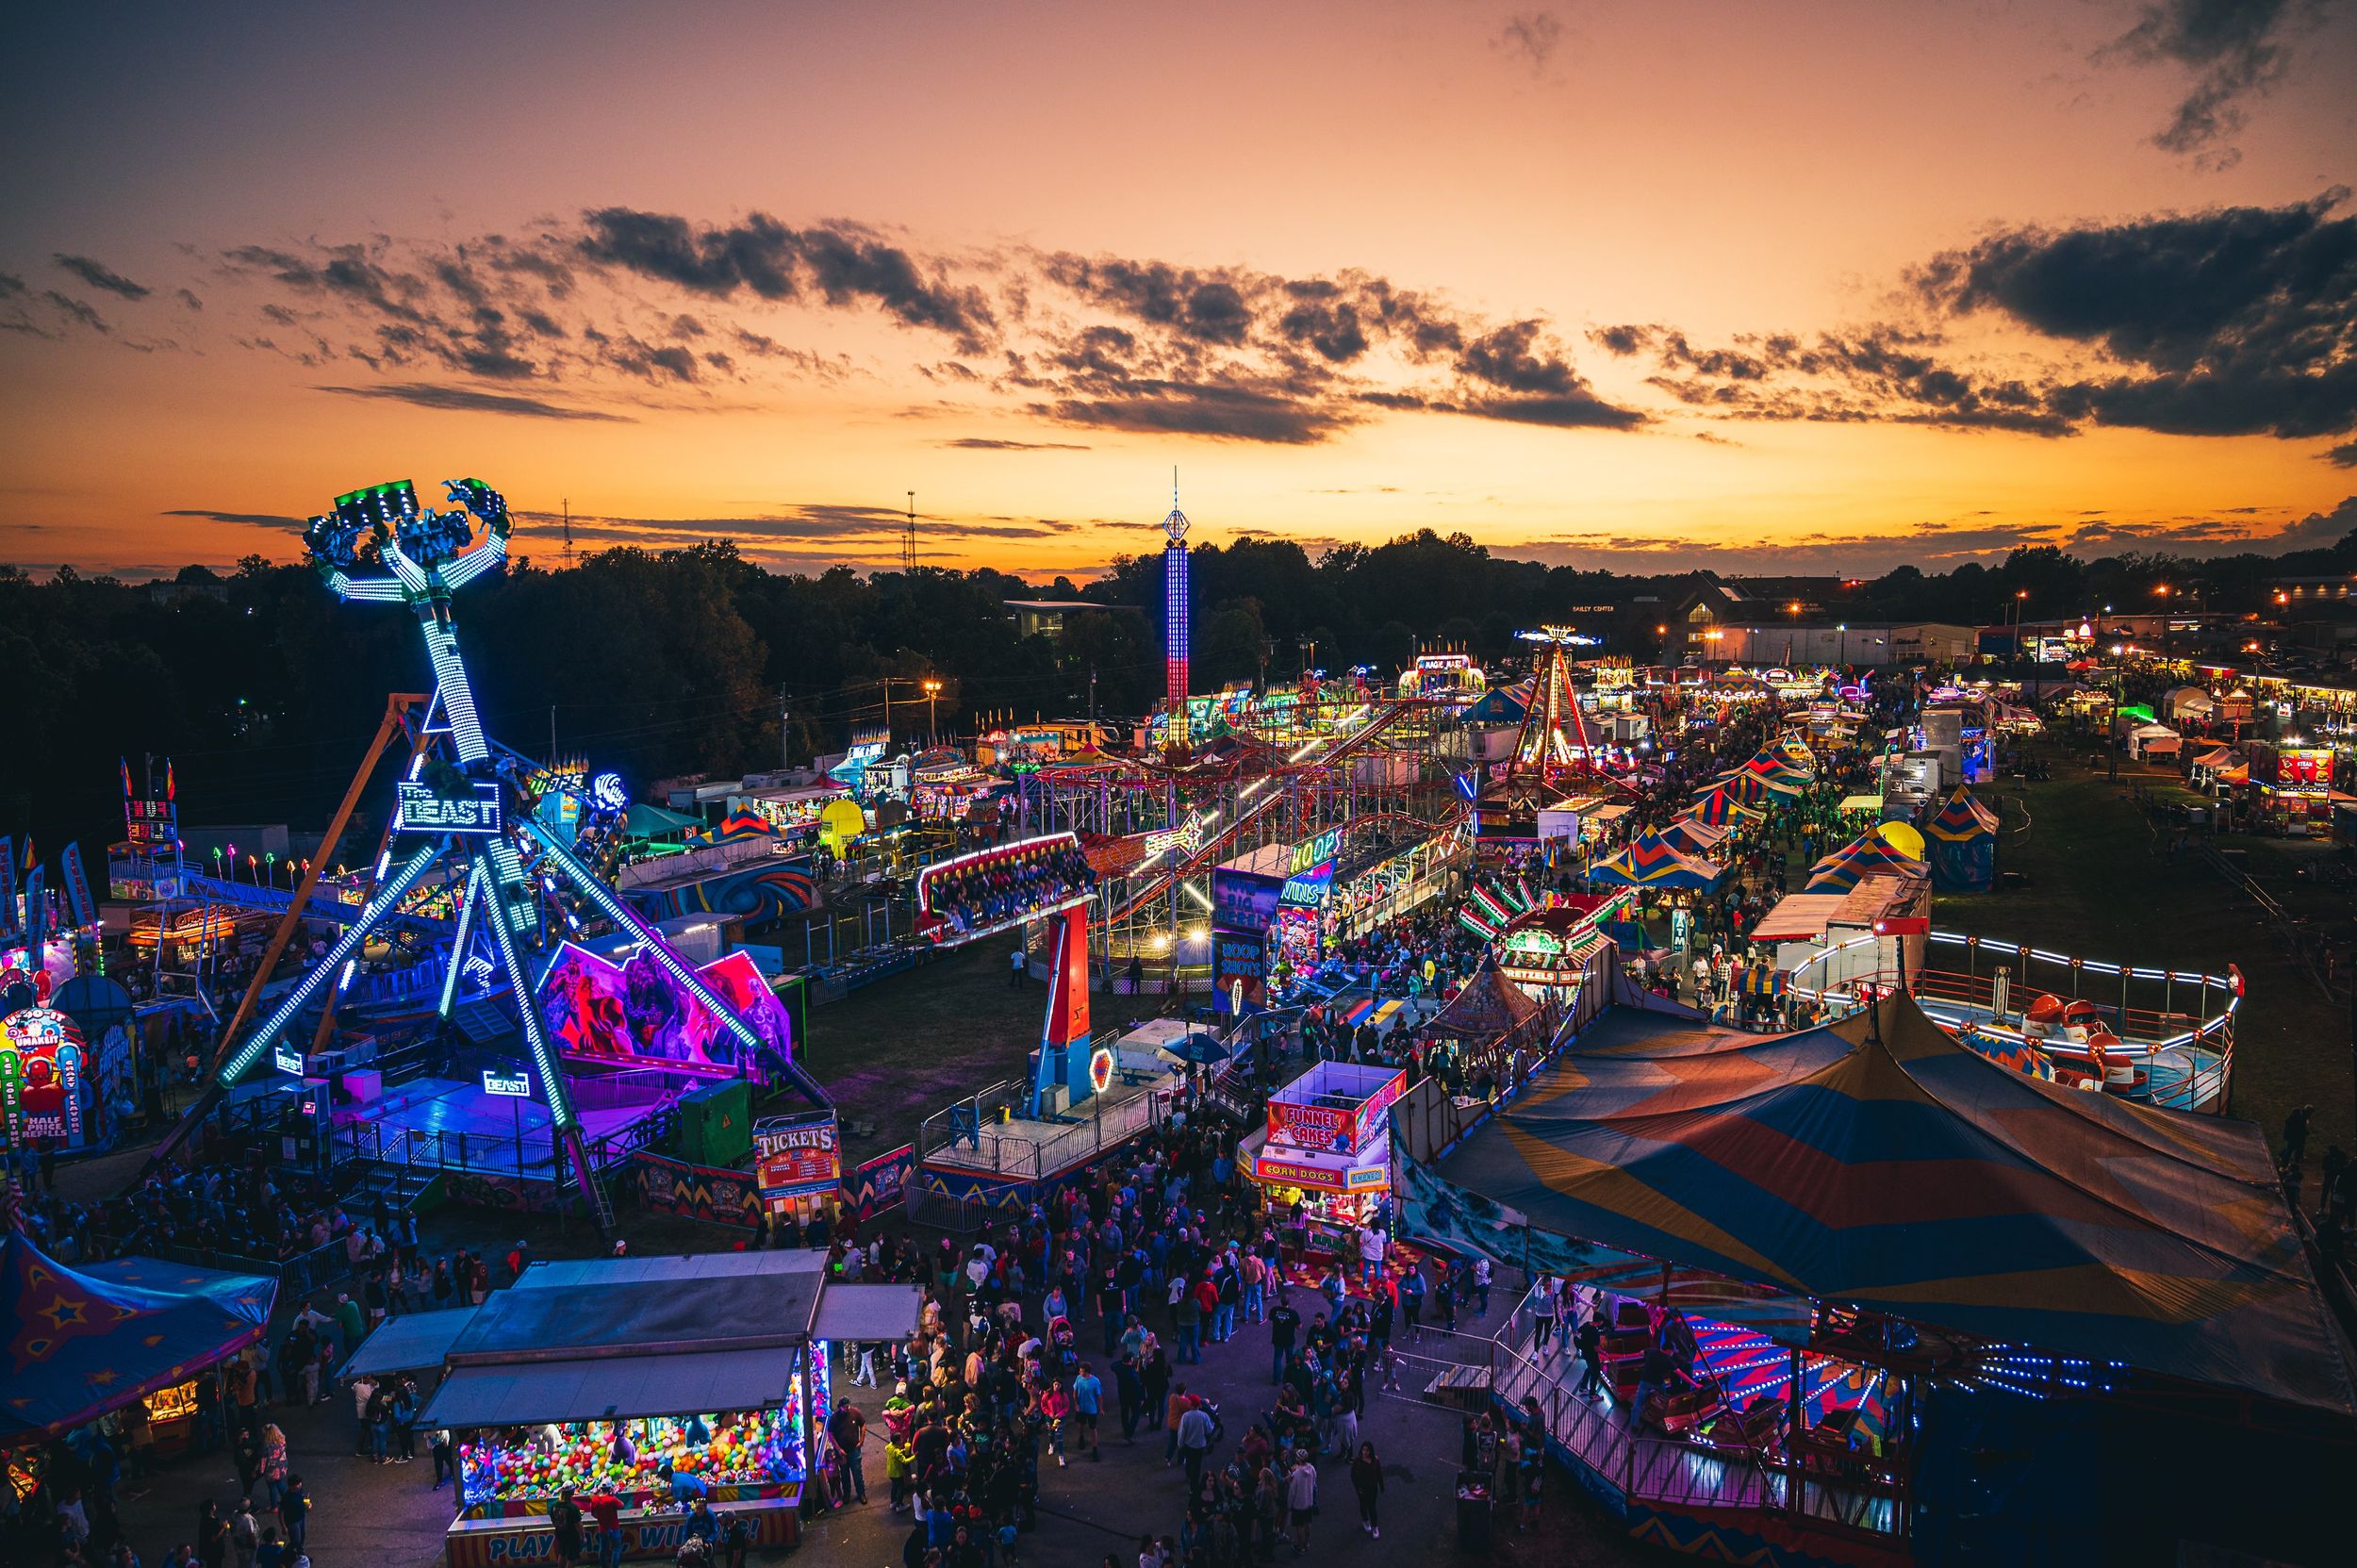 Brightly lit, colorful county festival